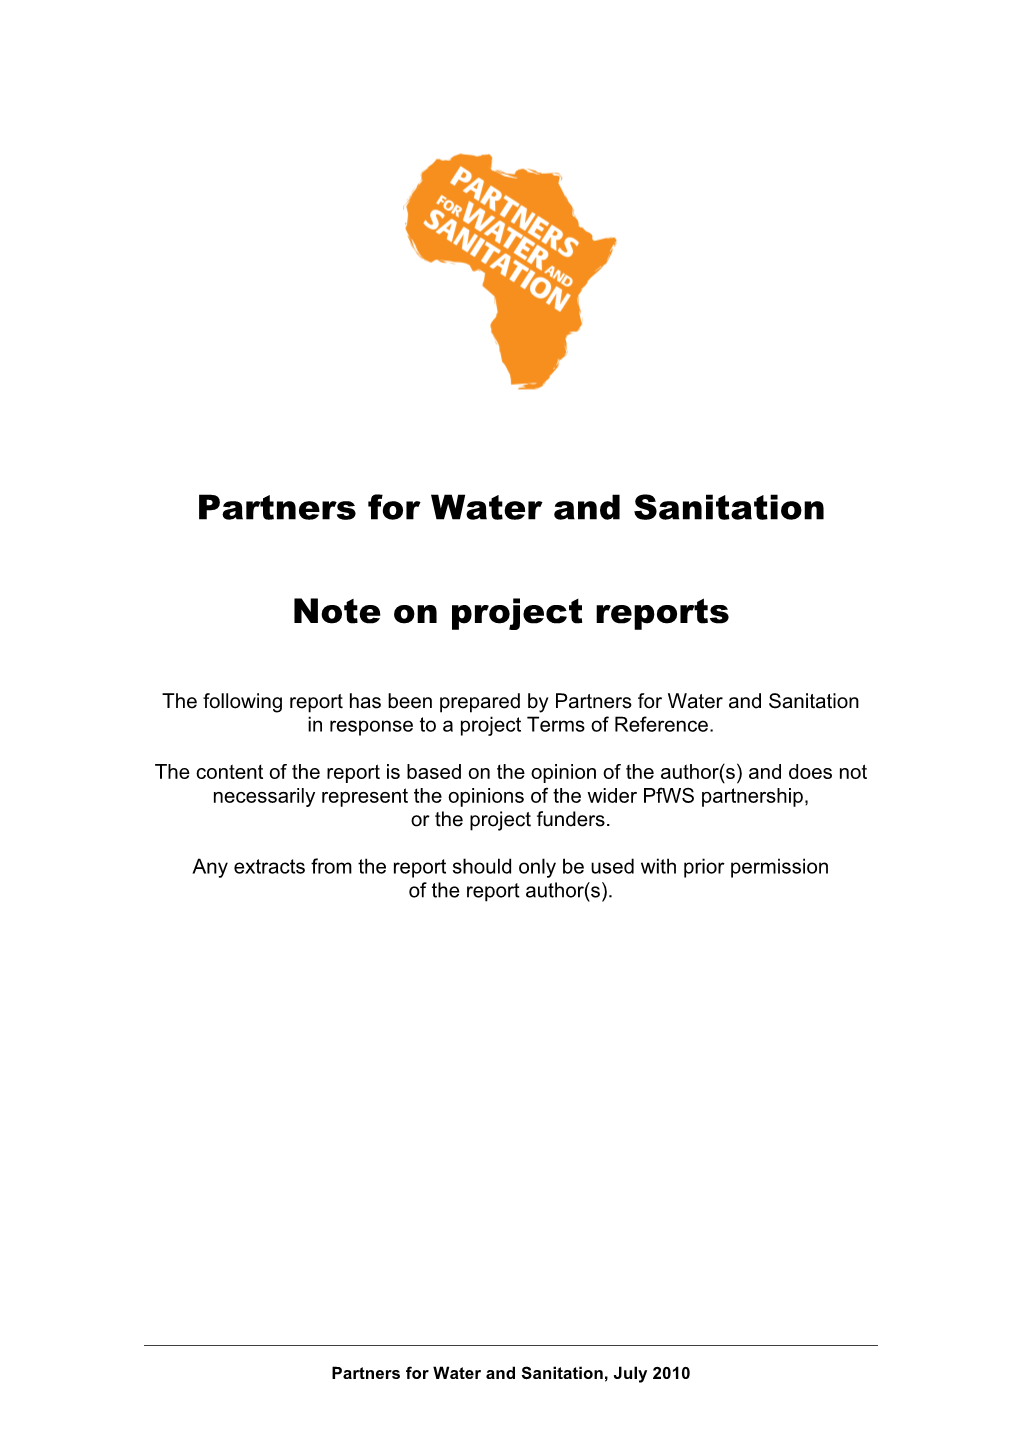 Partners for Water and Sanitation Note on Project Reports